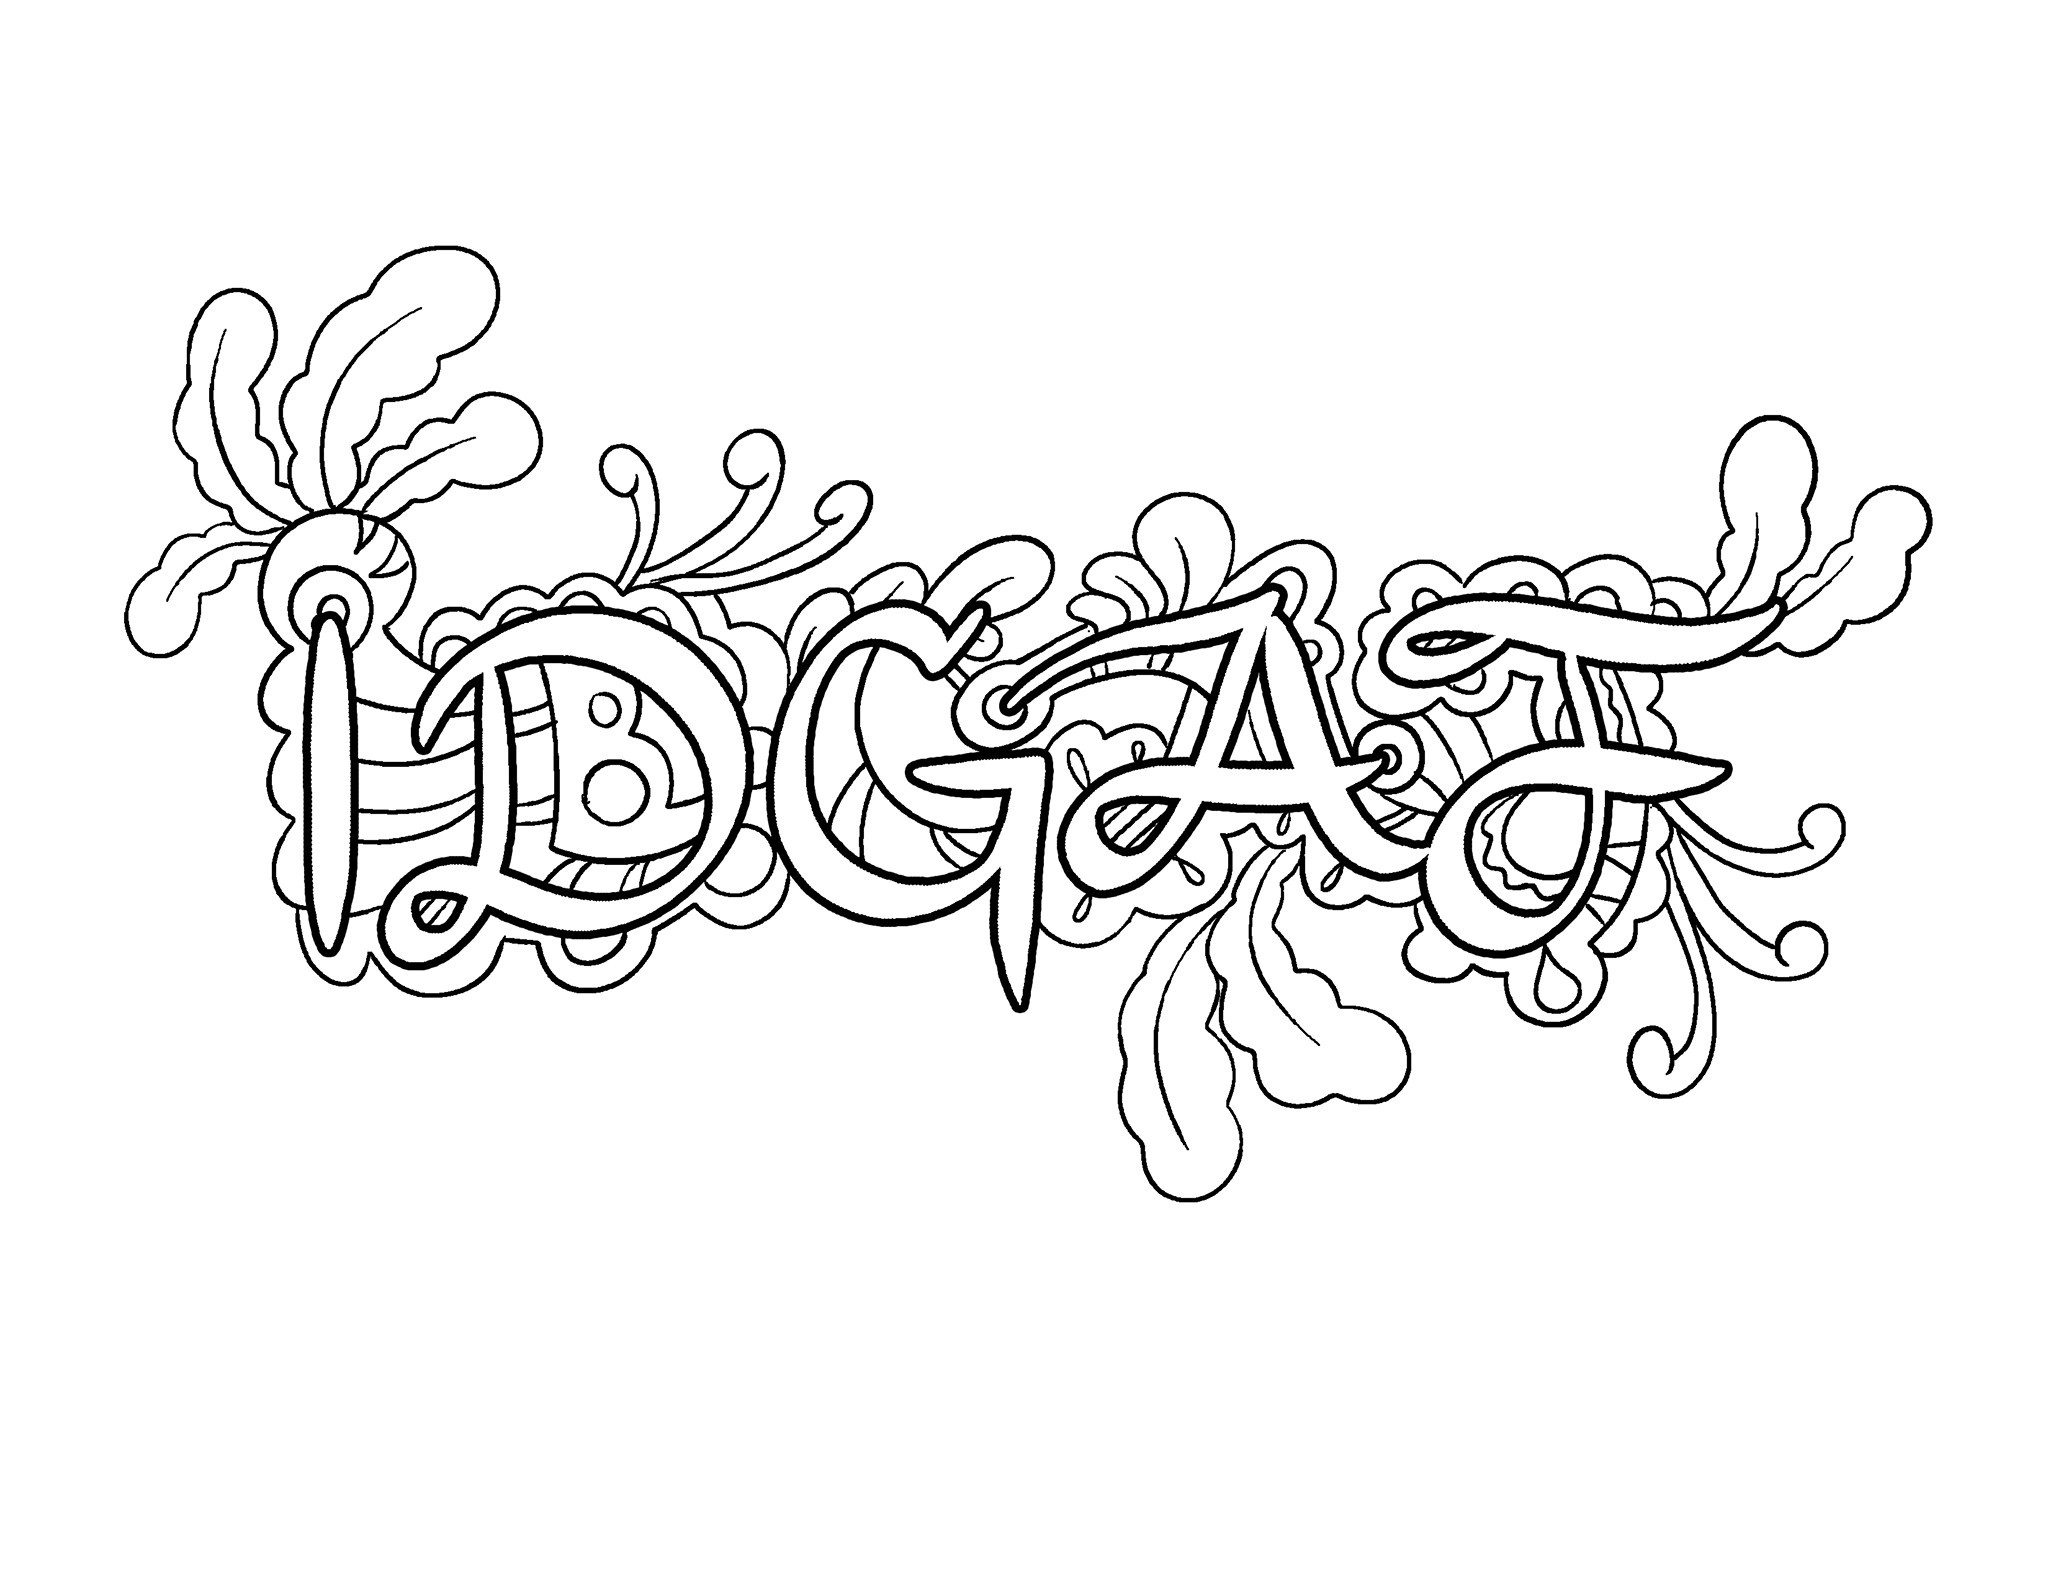 coloring pages : Printable Swear Word Colouring Pages Fresh Swearing  Coloring Pages At Getdrawings Printable Swear Word Colouring Pages ~  affiliateprogrambook.com